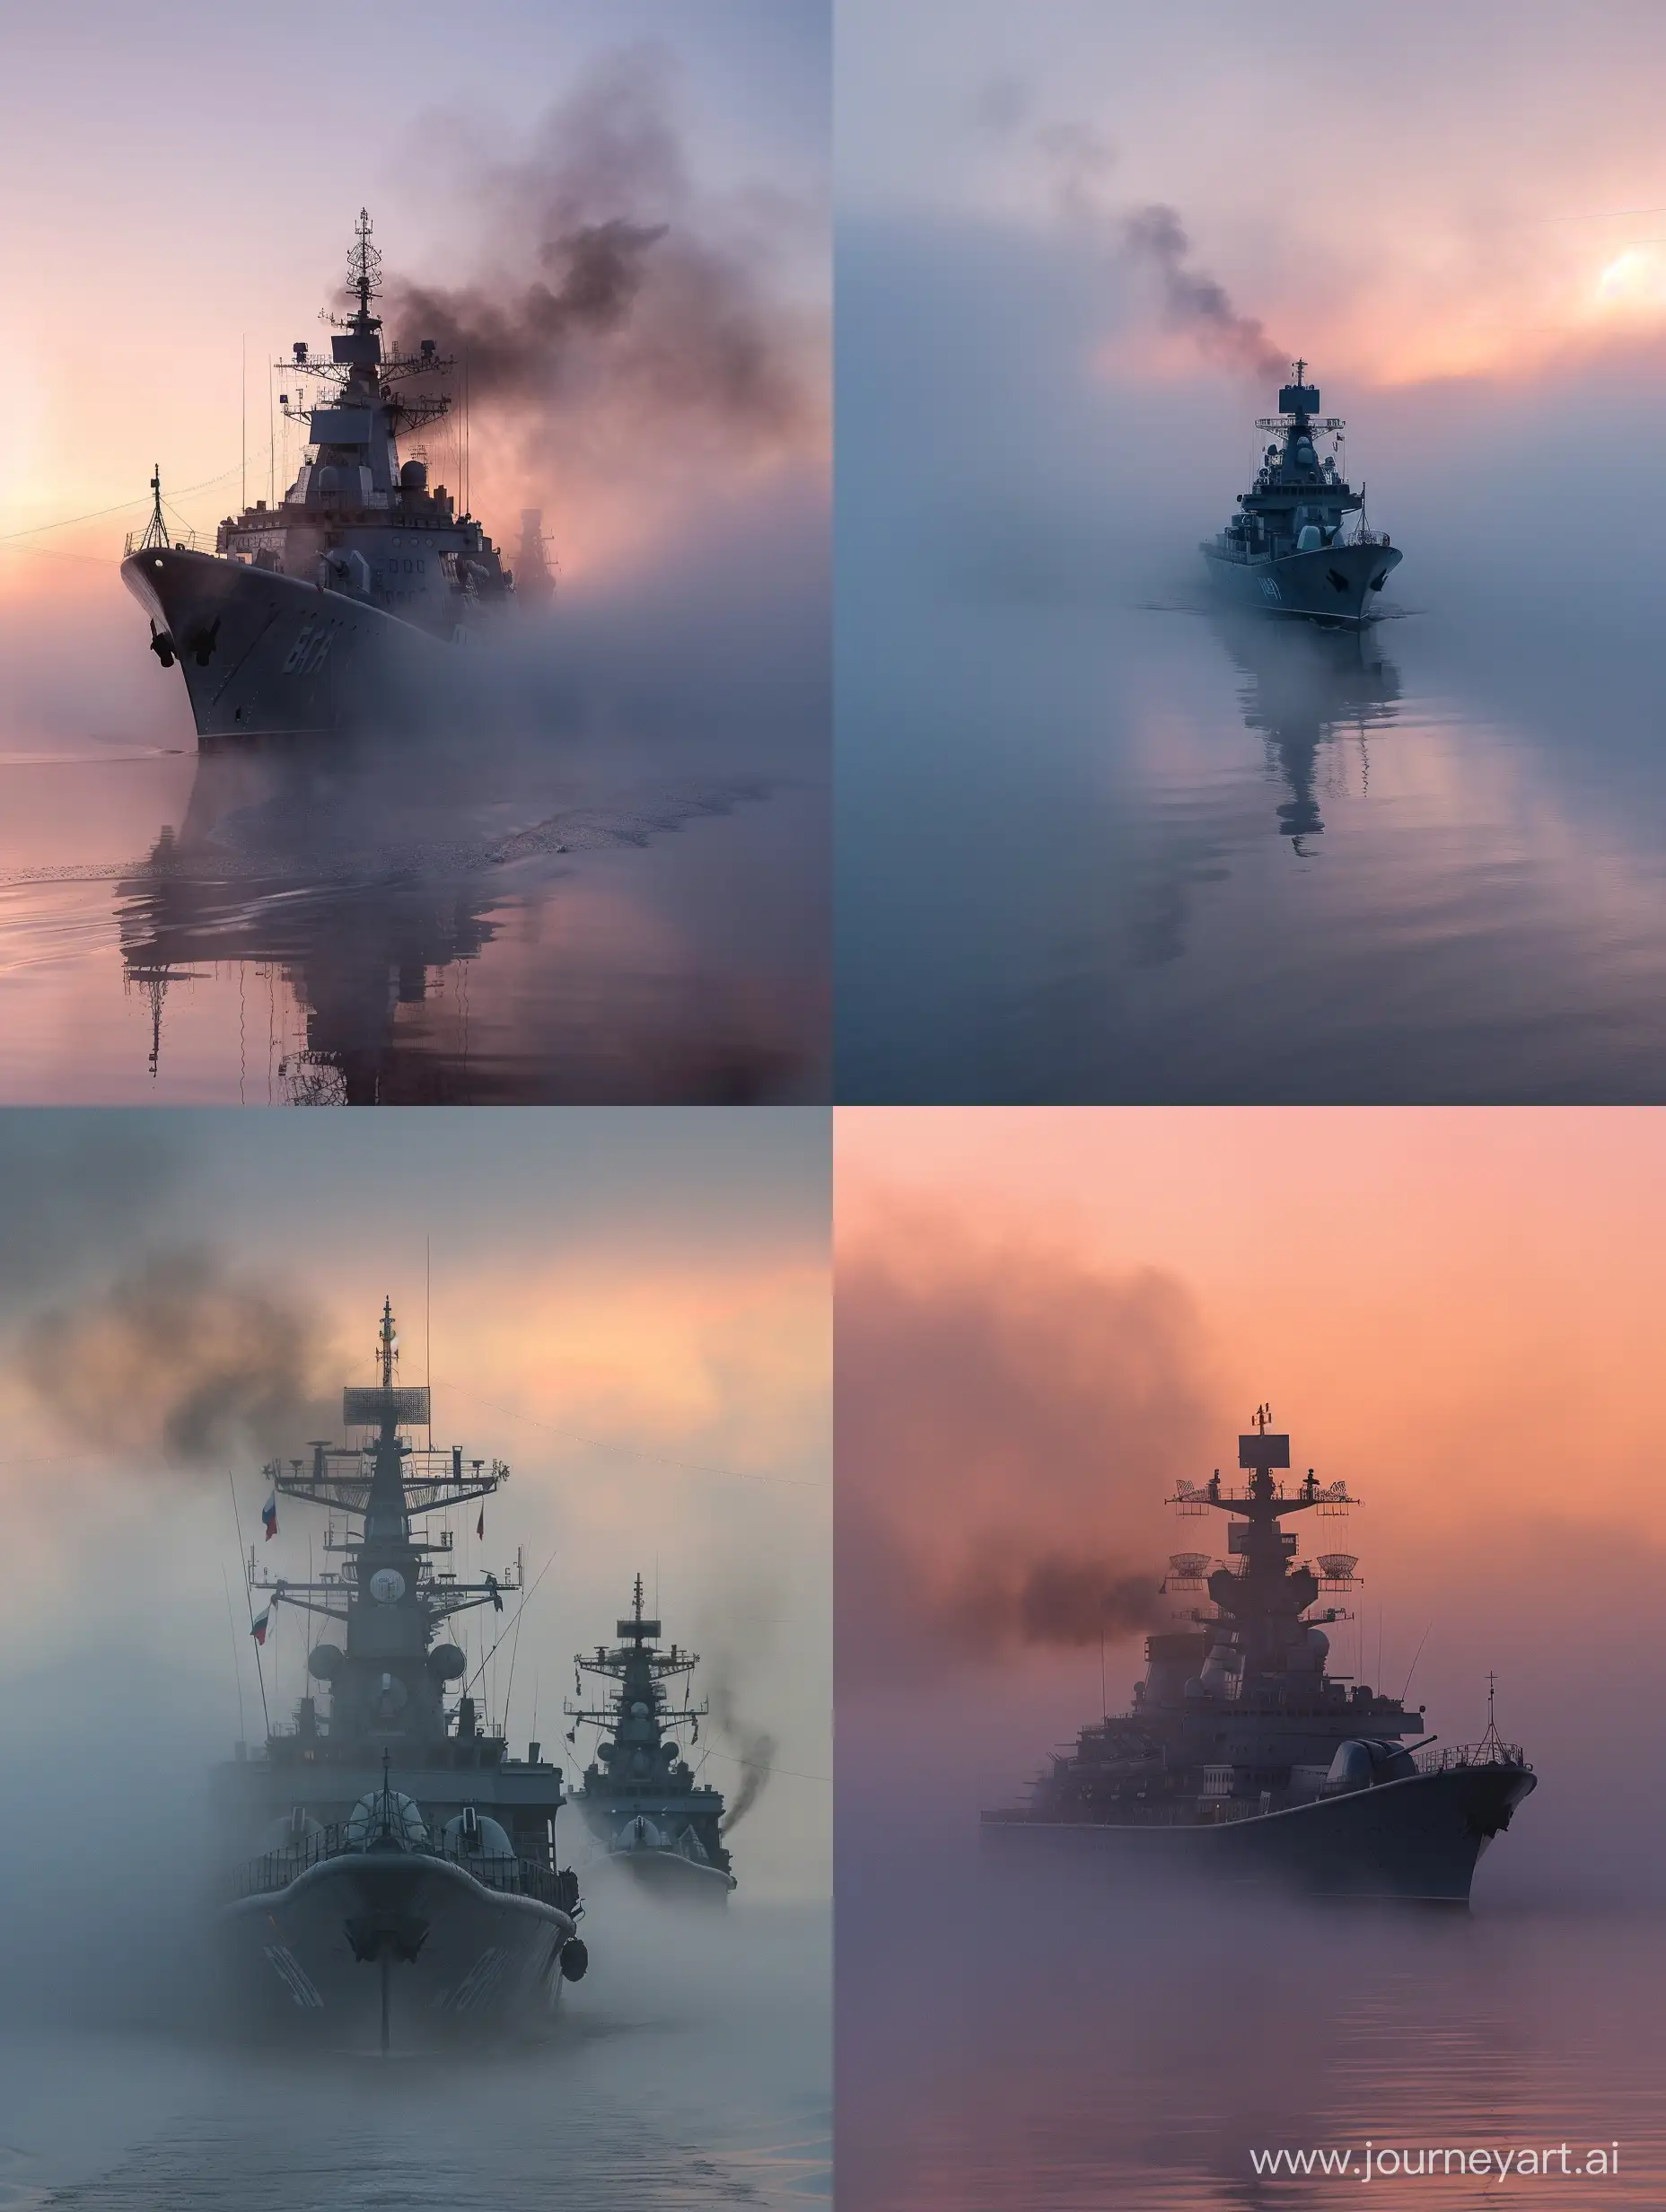 /promt A Russian warship in the fog, followed by dawn